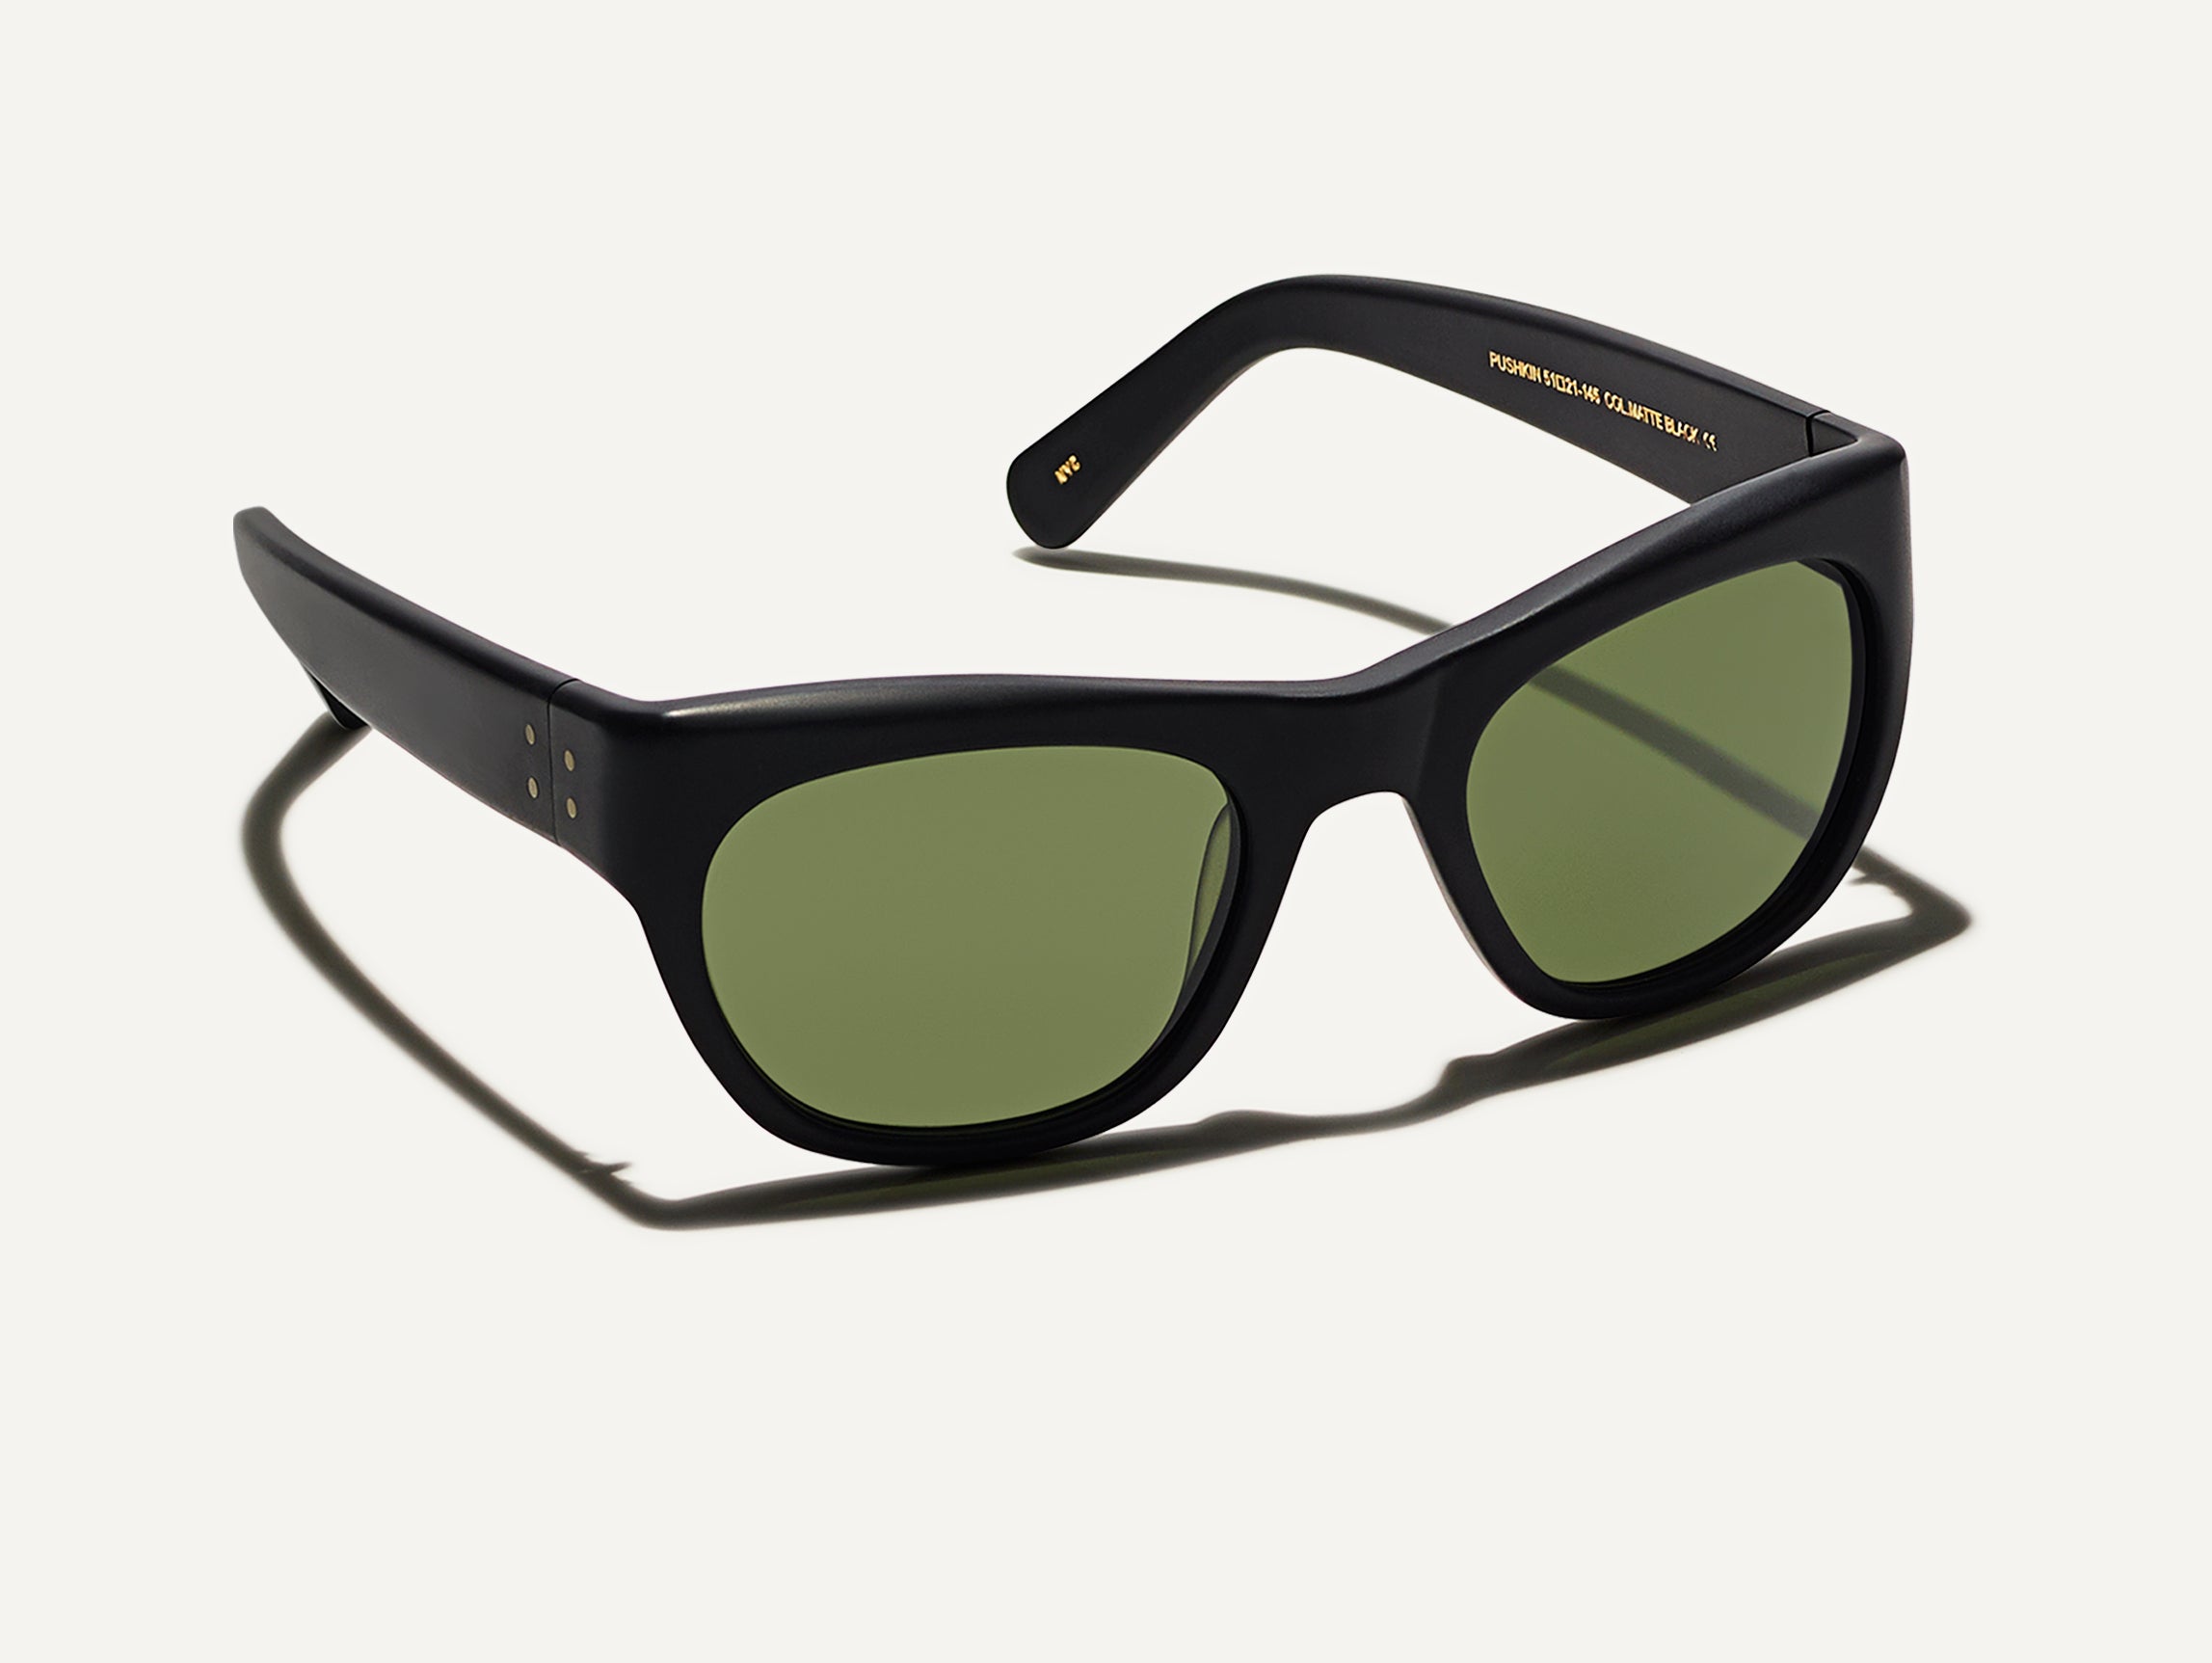 The PUSHKIN in Matte Black with G-15 Glass Lenses